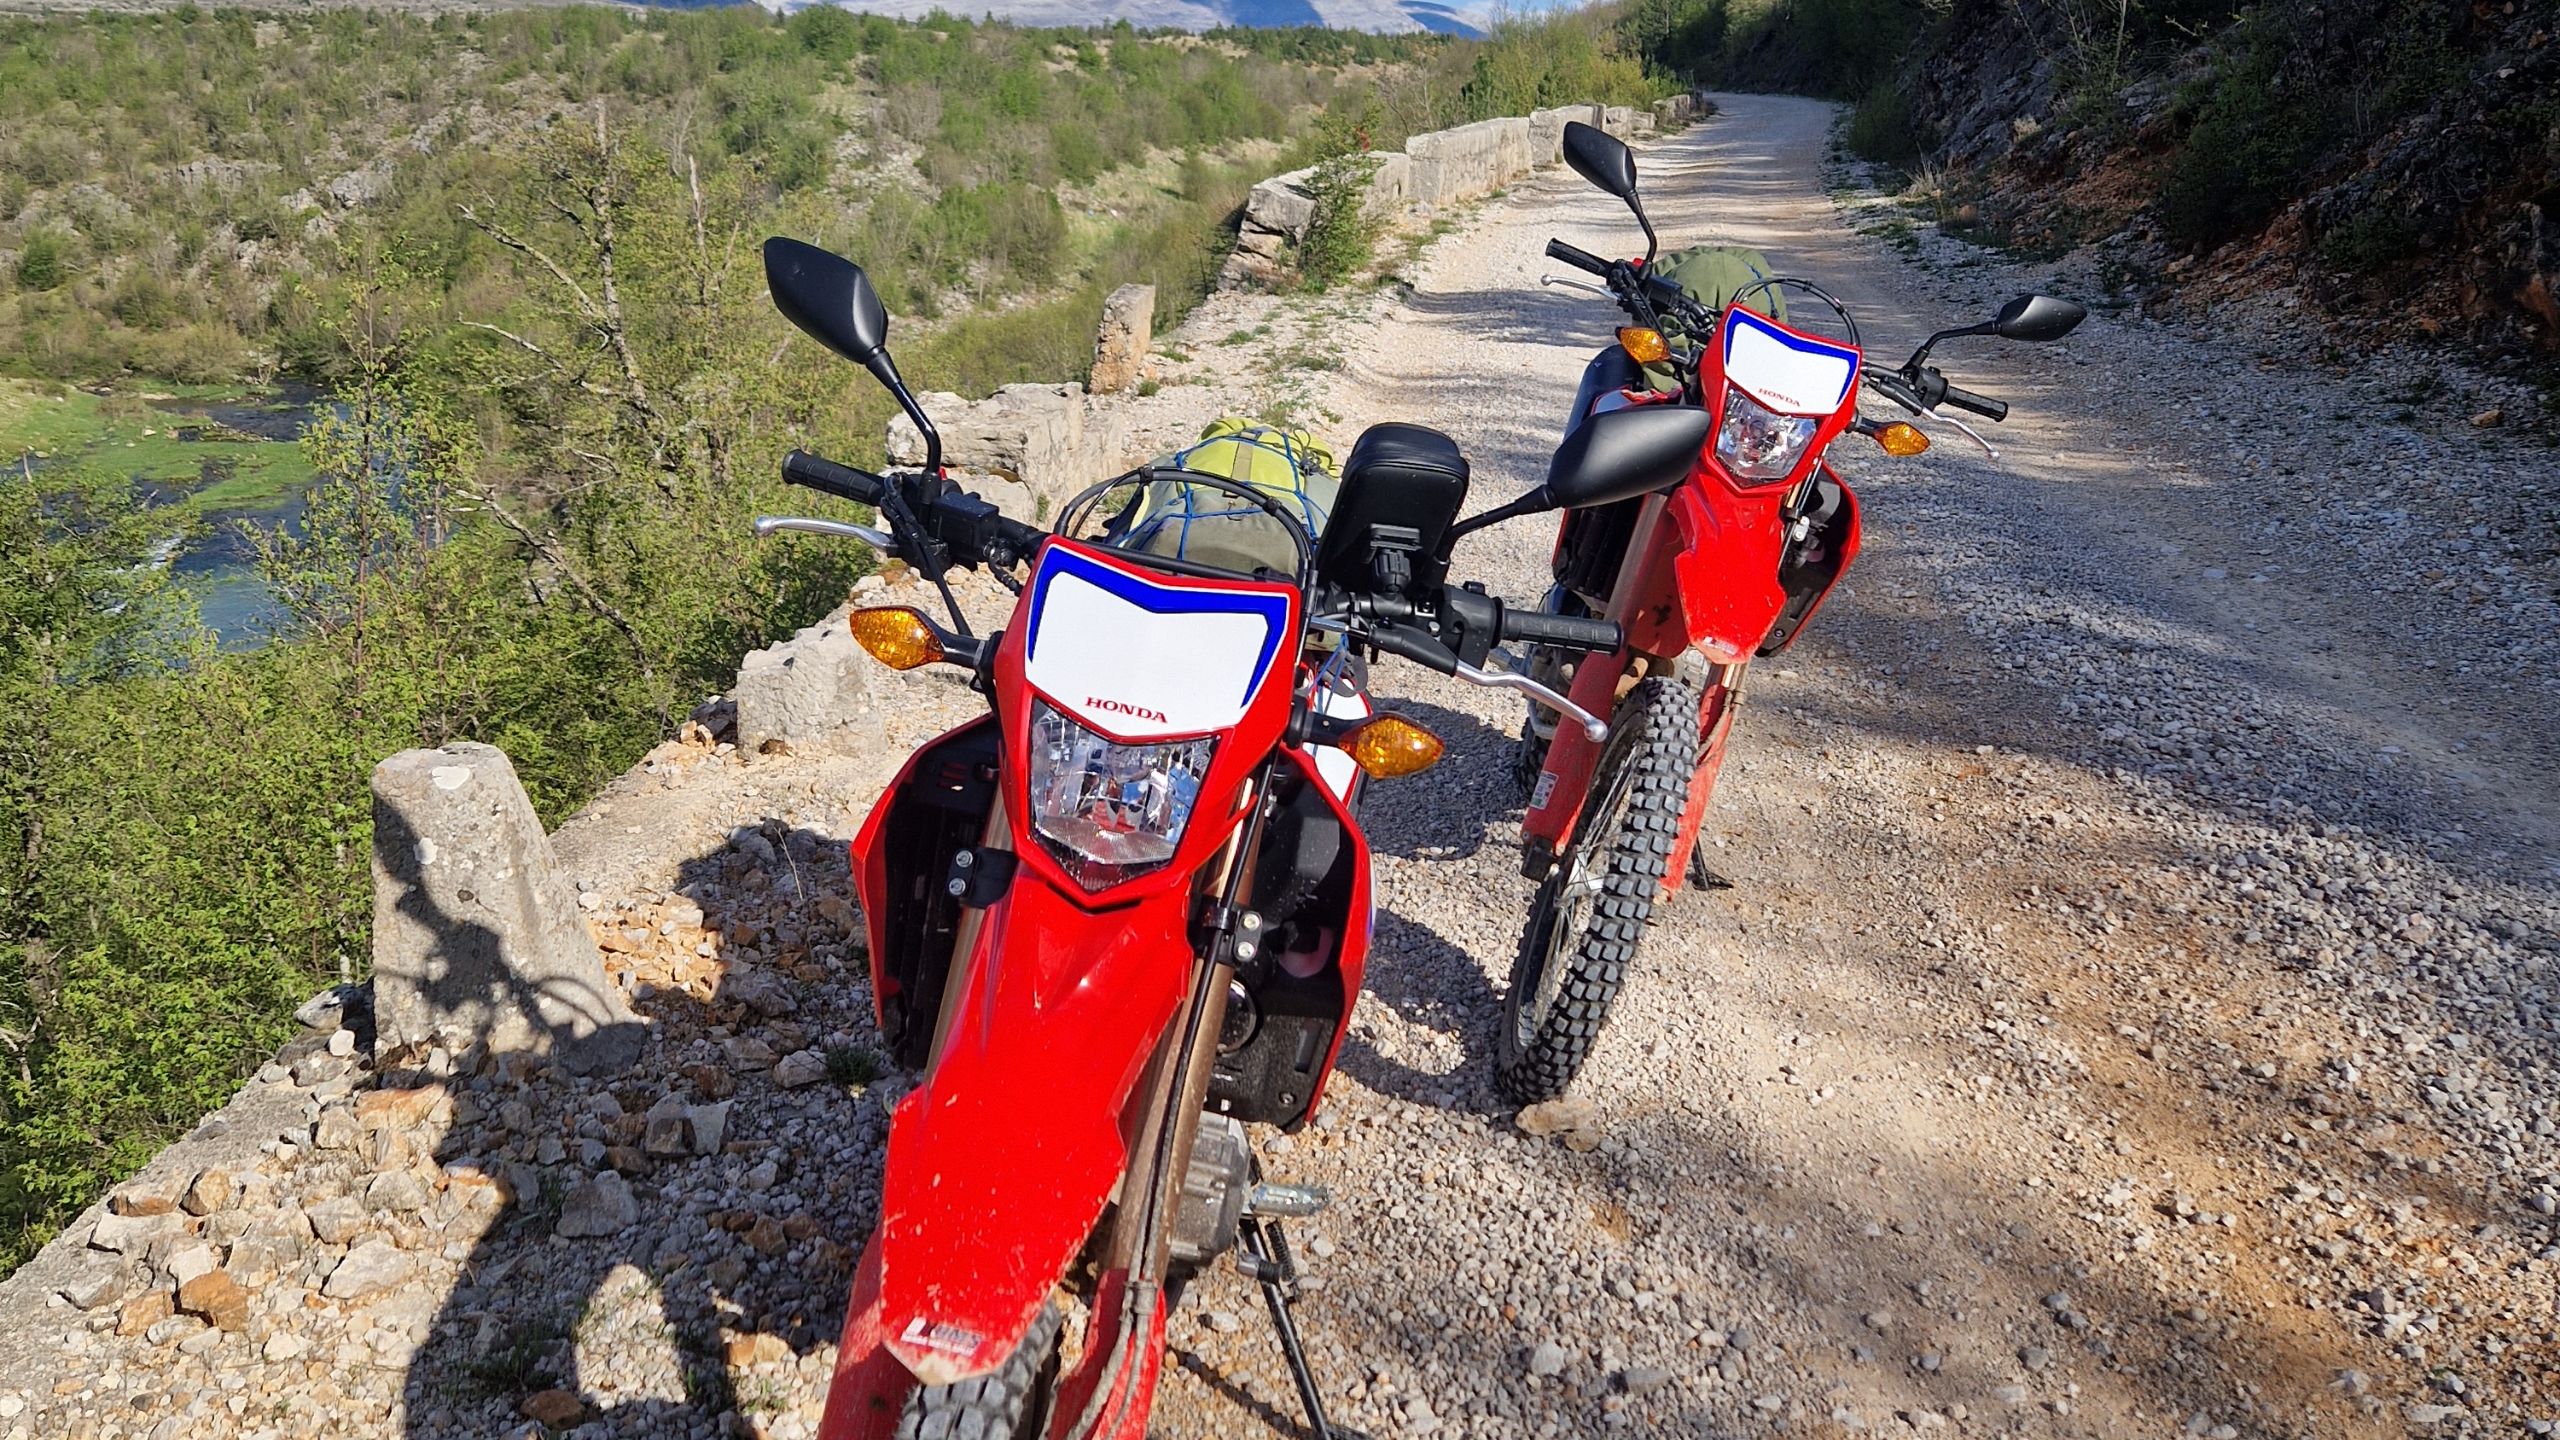 Funmoto ADVentures sightseeing tours and Honda CRF motorcycles for rent